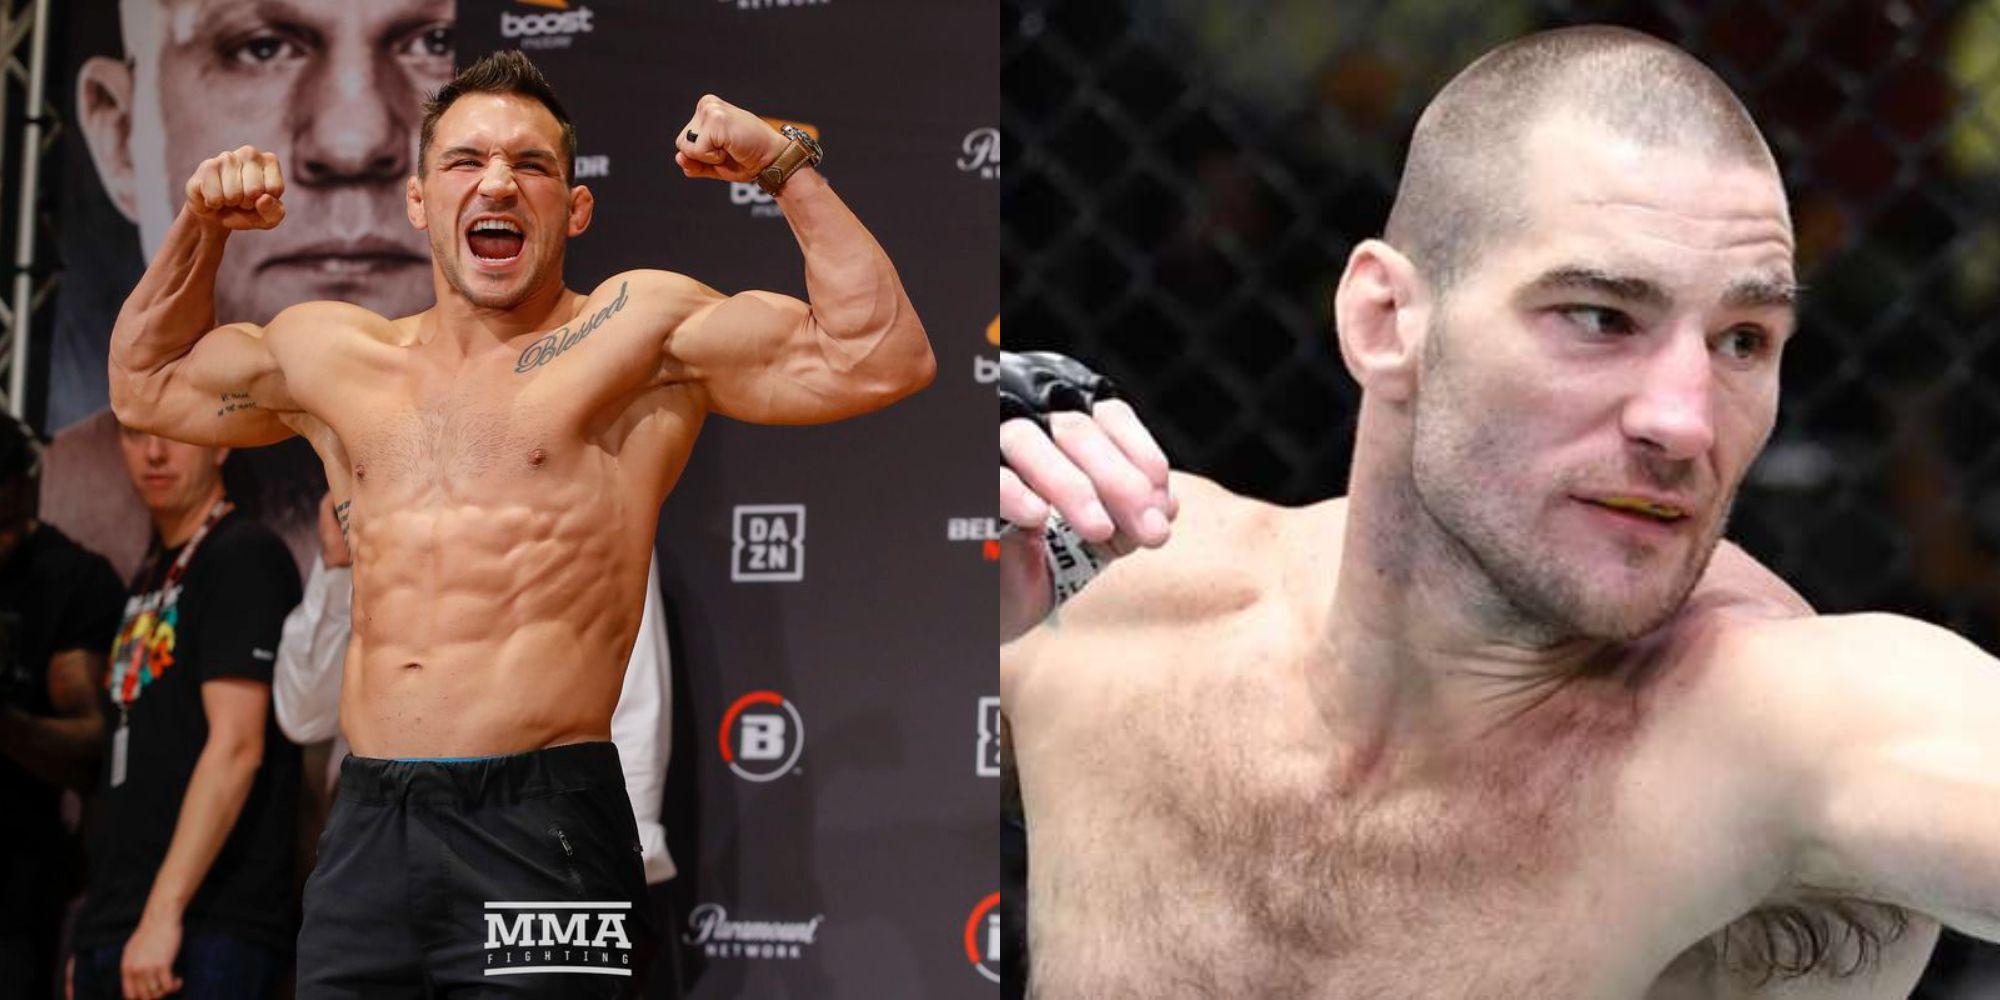 Split image showing Michael Chandler and Sean Strickland.